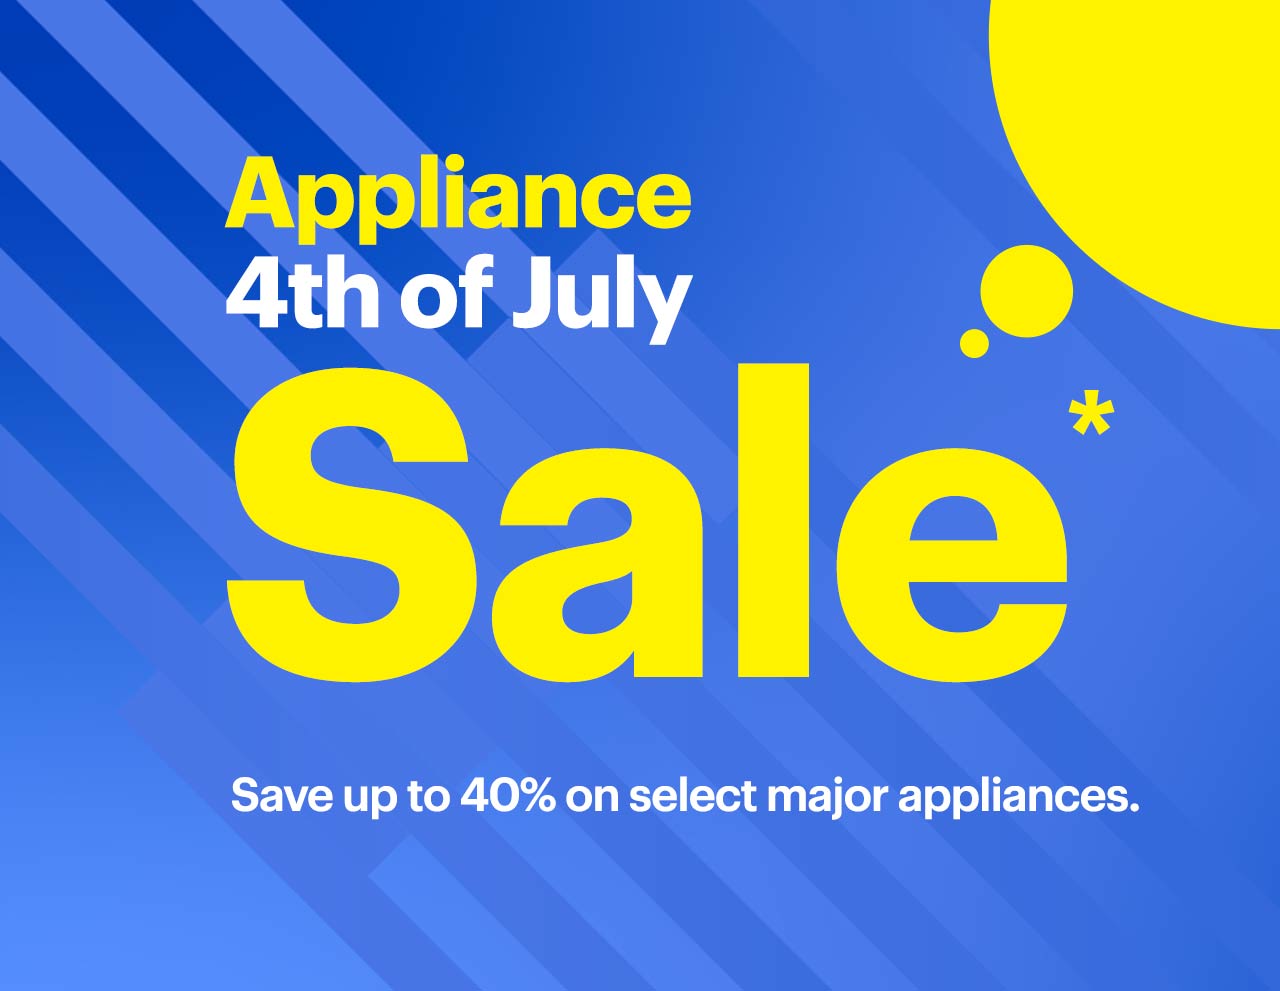 Appliance 4th of July Sale. Save up to 40% on select major appliances. Reference disclaimer.